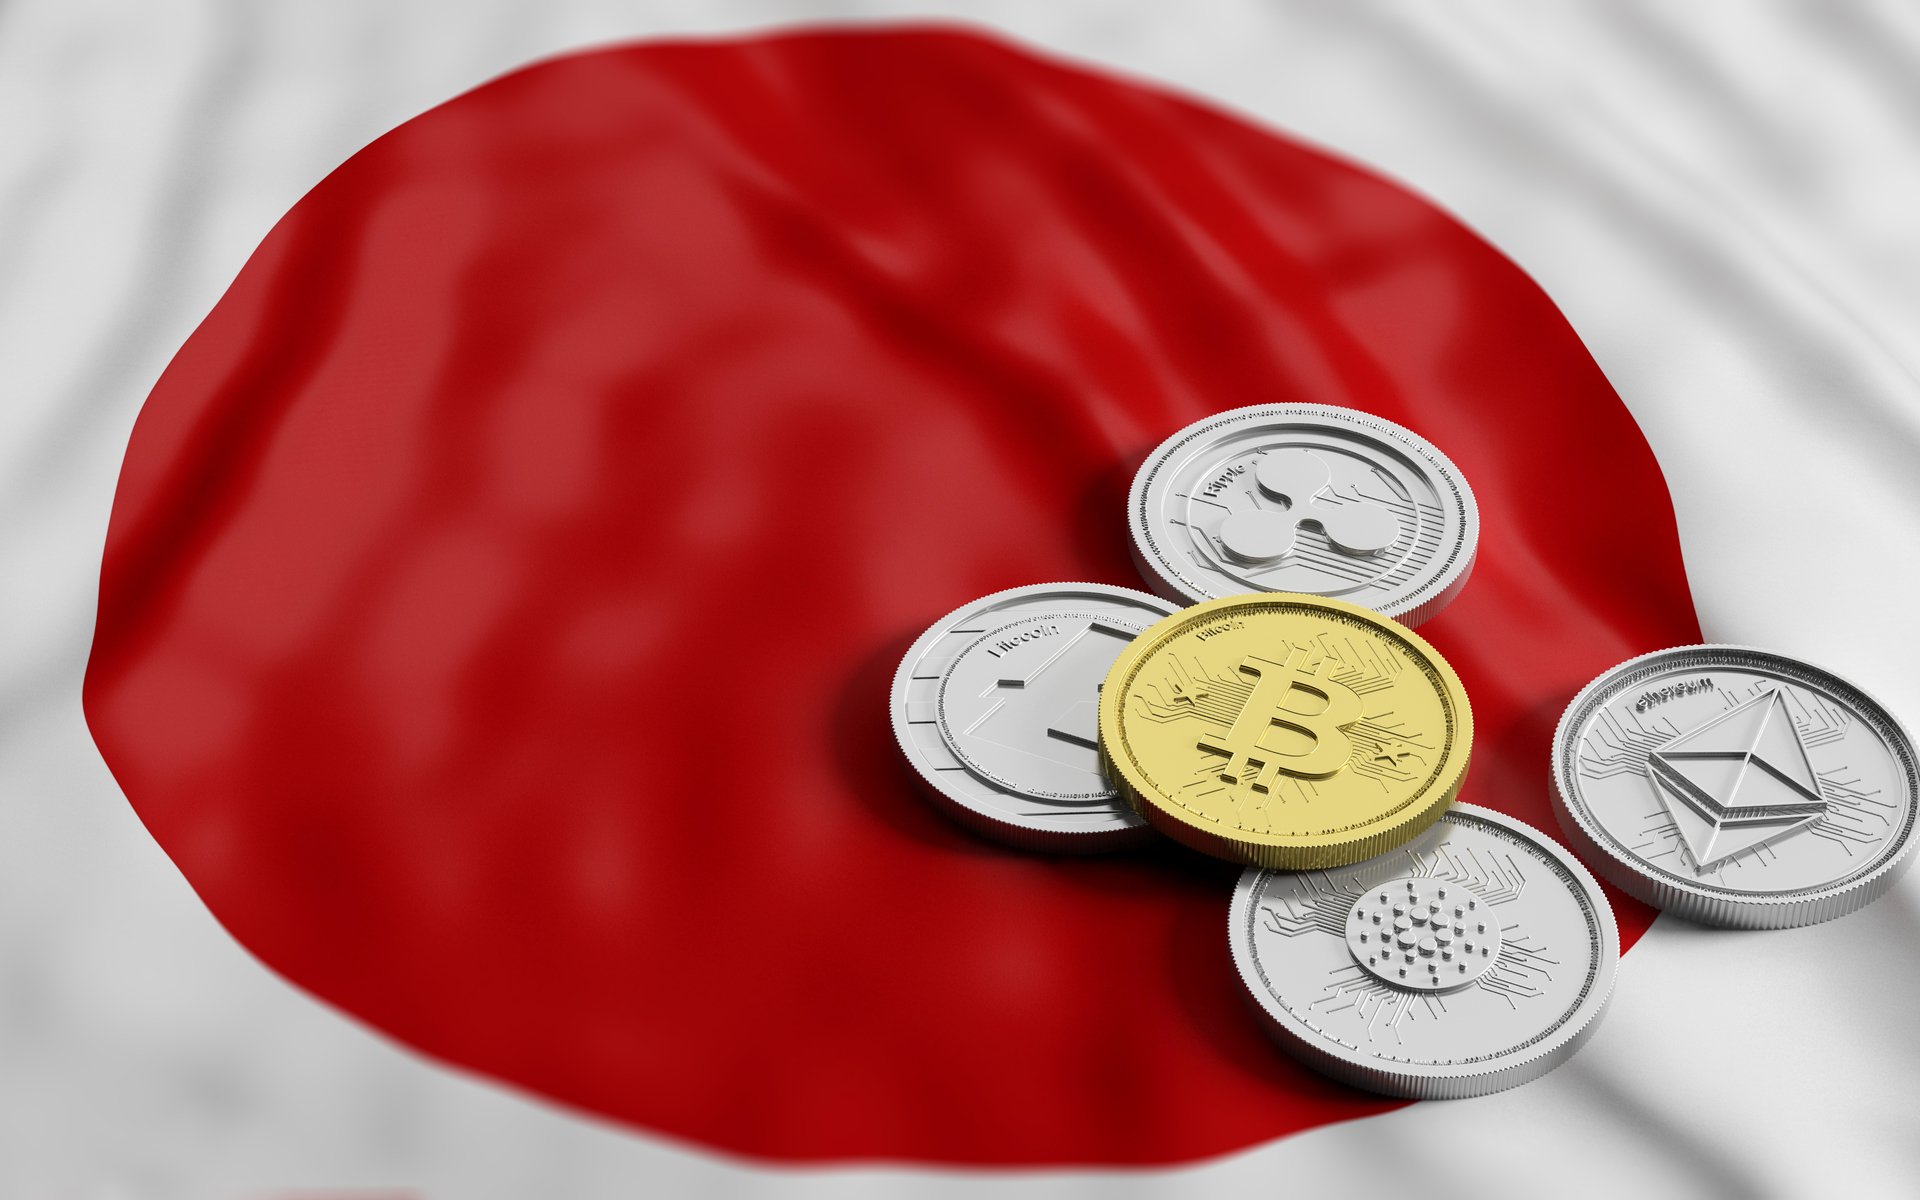 Is Japan Entering the Central Bank Digital Currency Space Too?